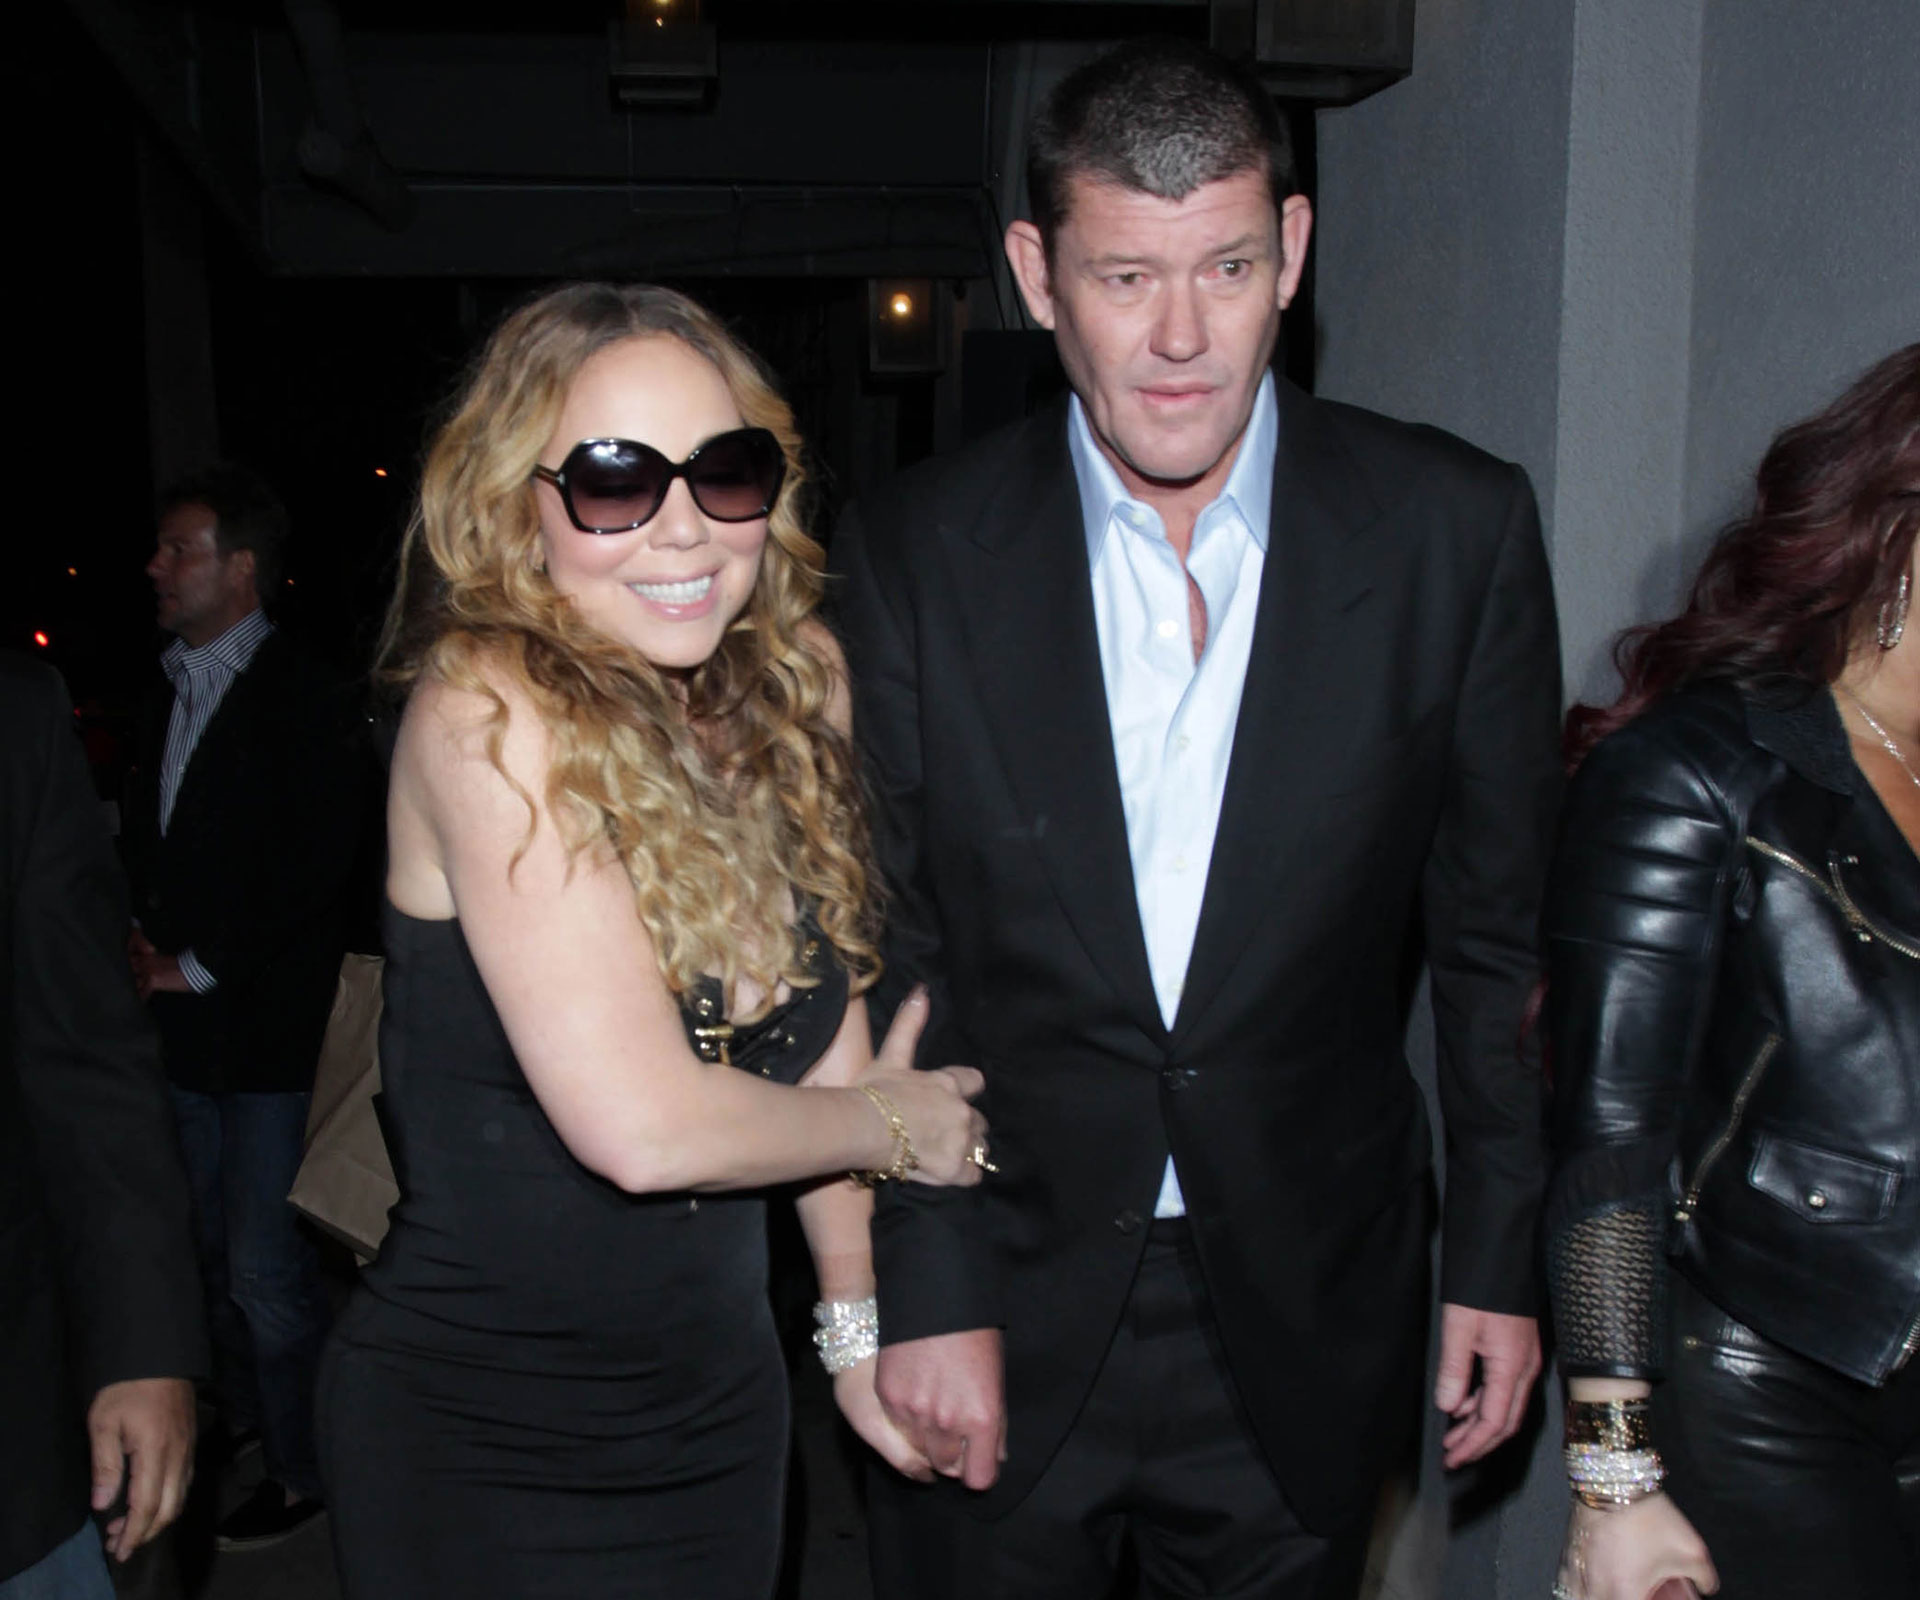 James Packer and Mariah Carey’s wedding in doubt